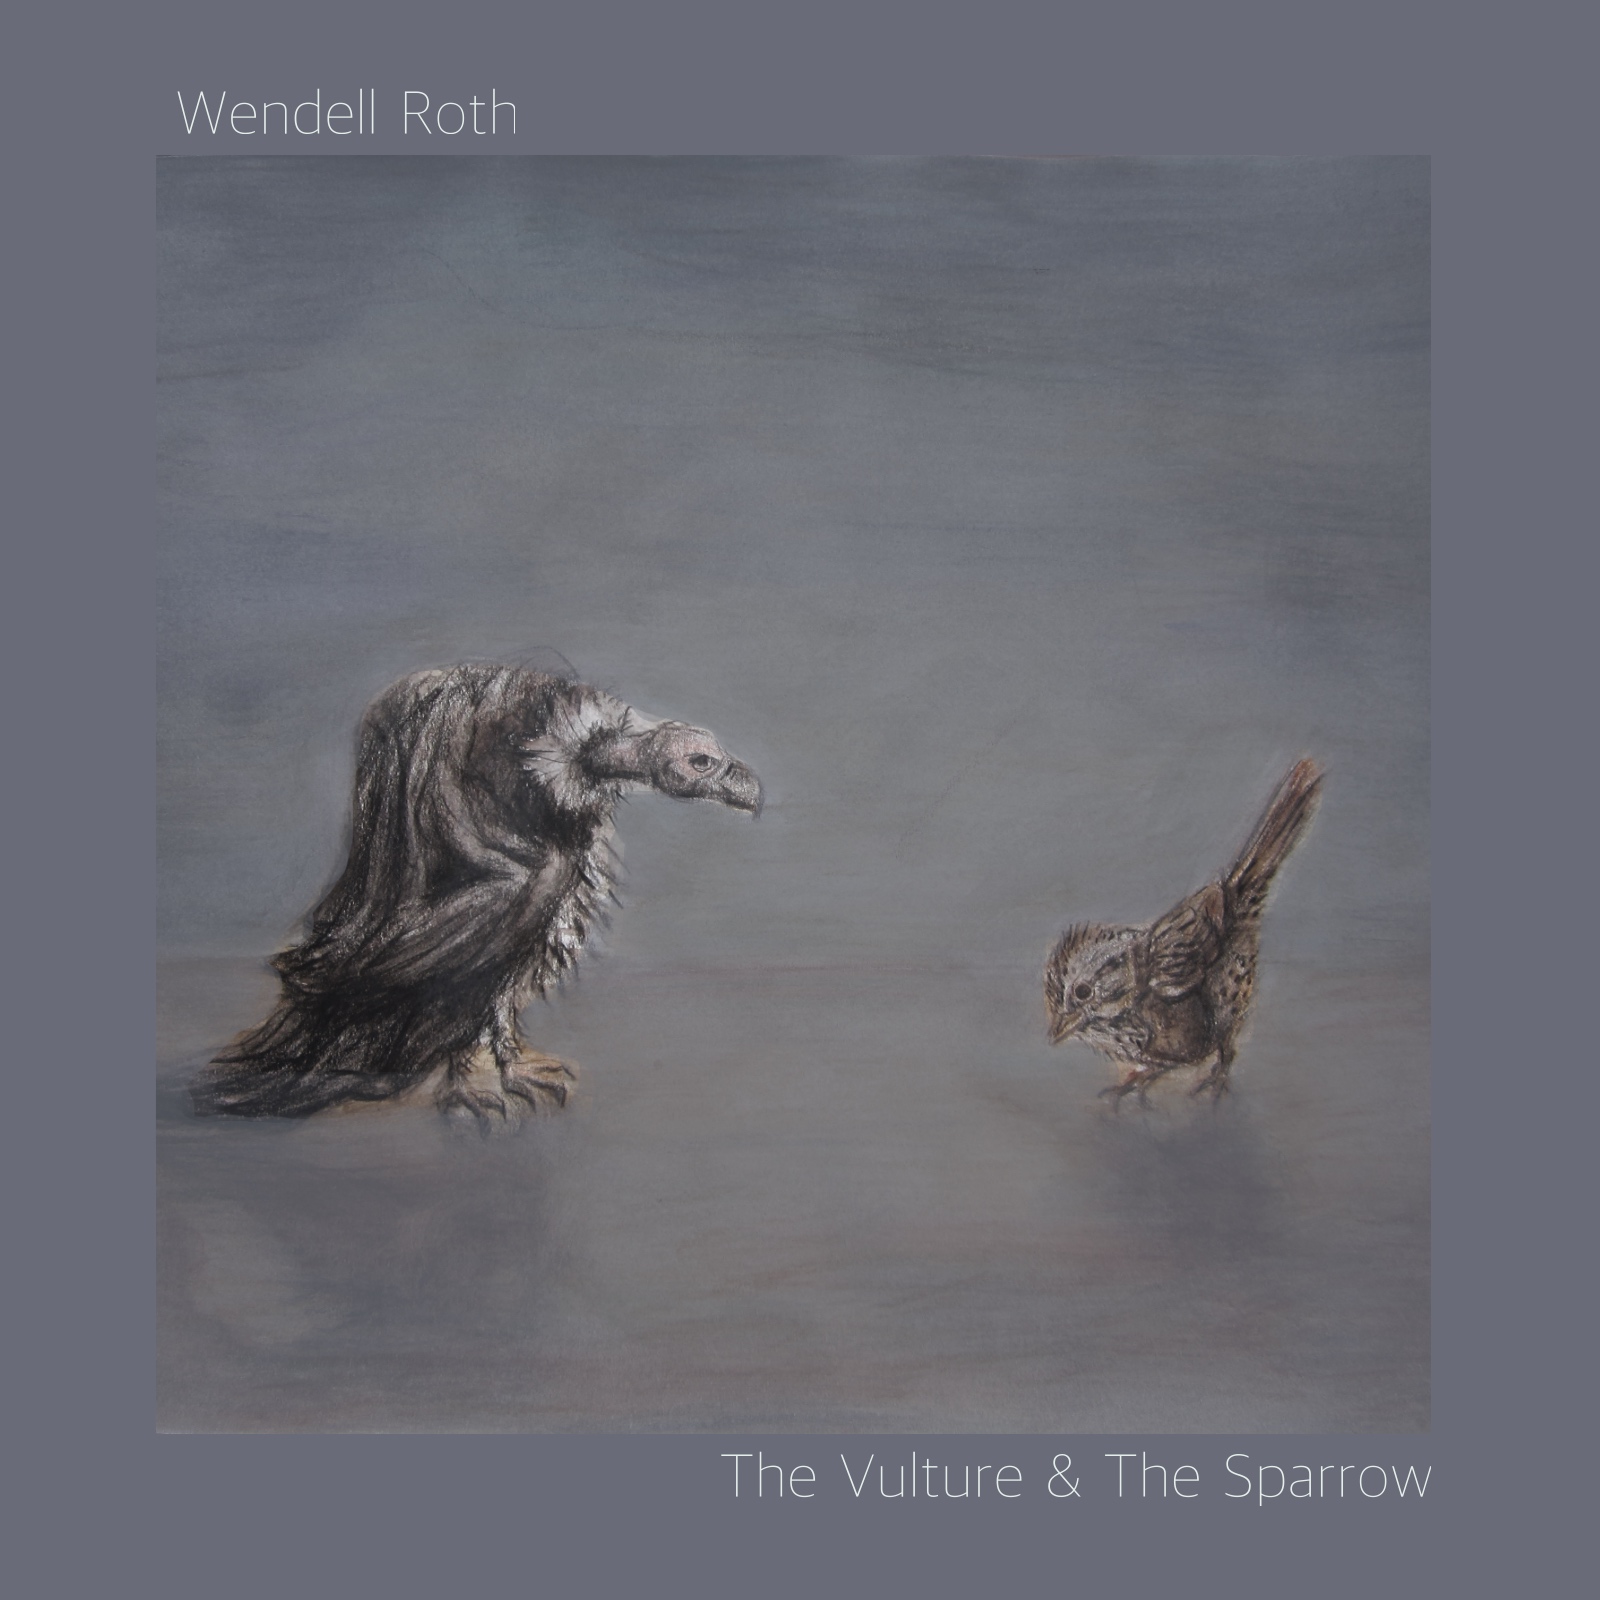 Wendell Roth – The Vulture & The Sparrow